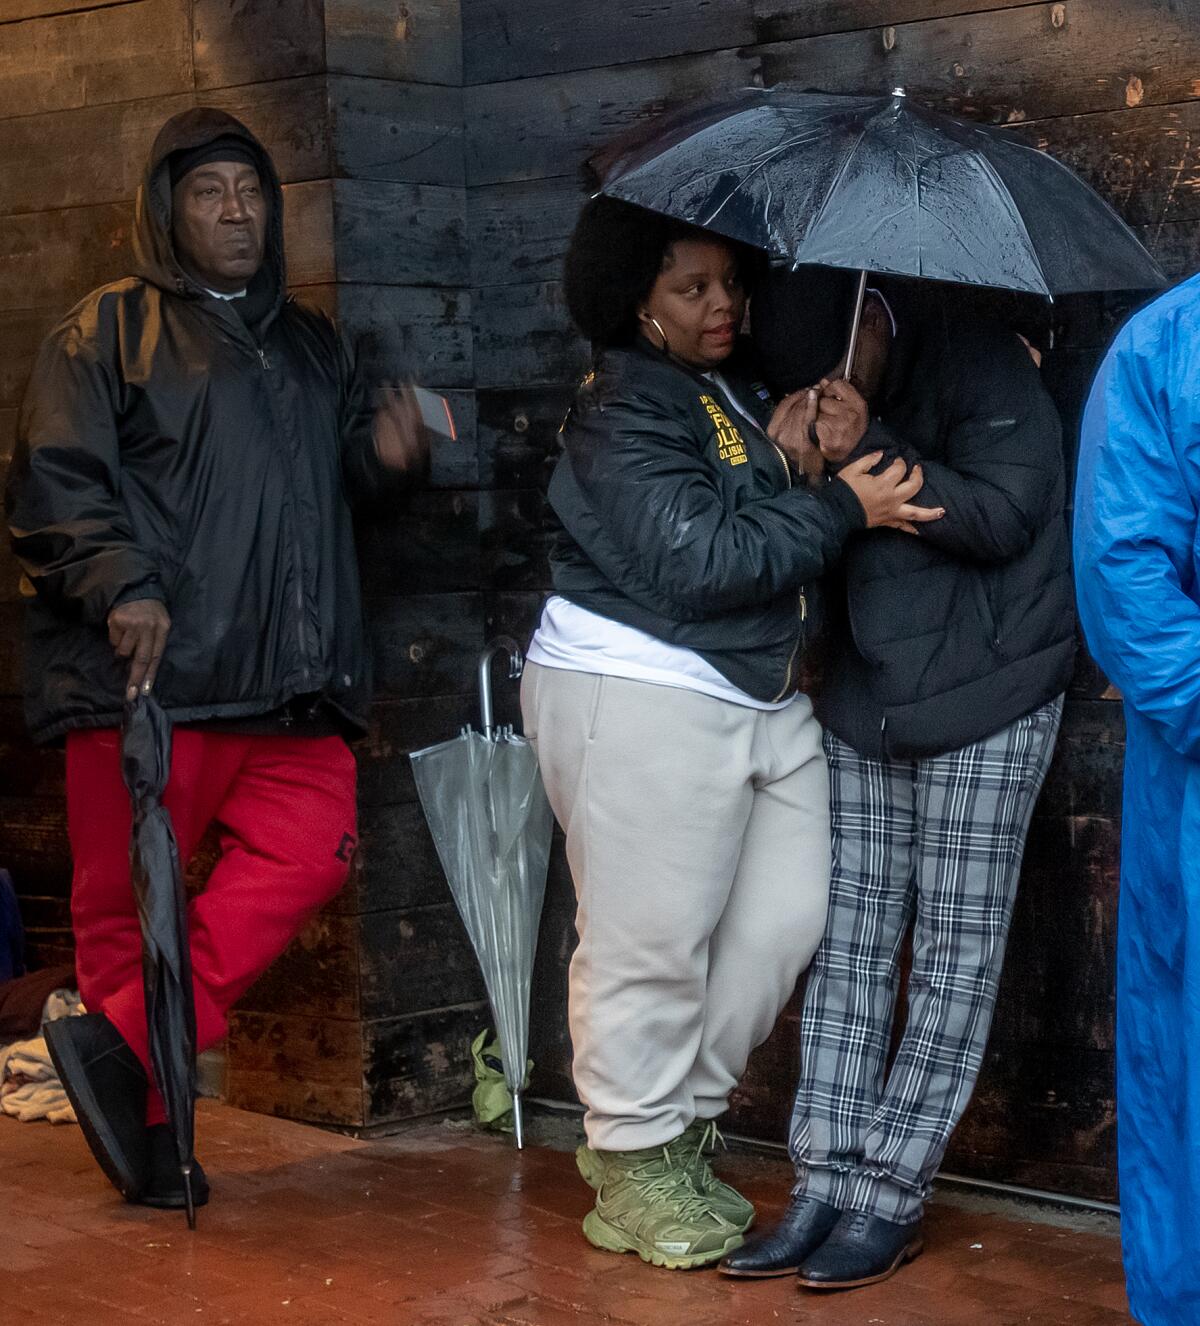 Patrisse Cullors and other relatives hold umbrellas at a candlelight vigil for Keenan Anderson.